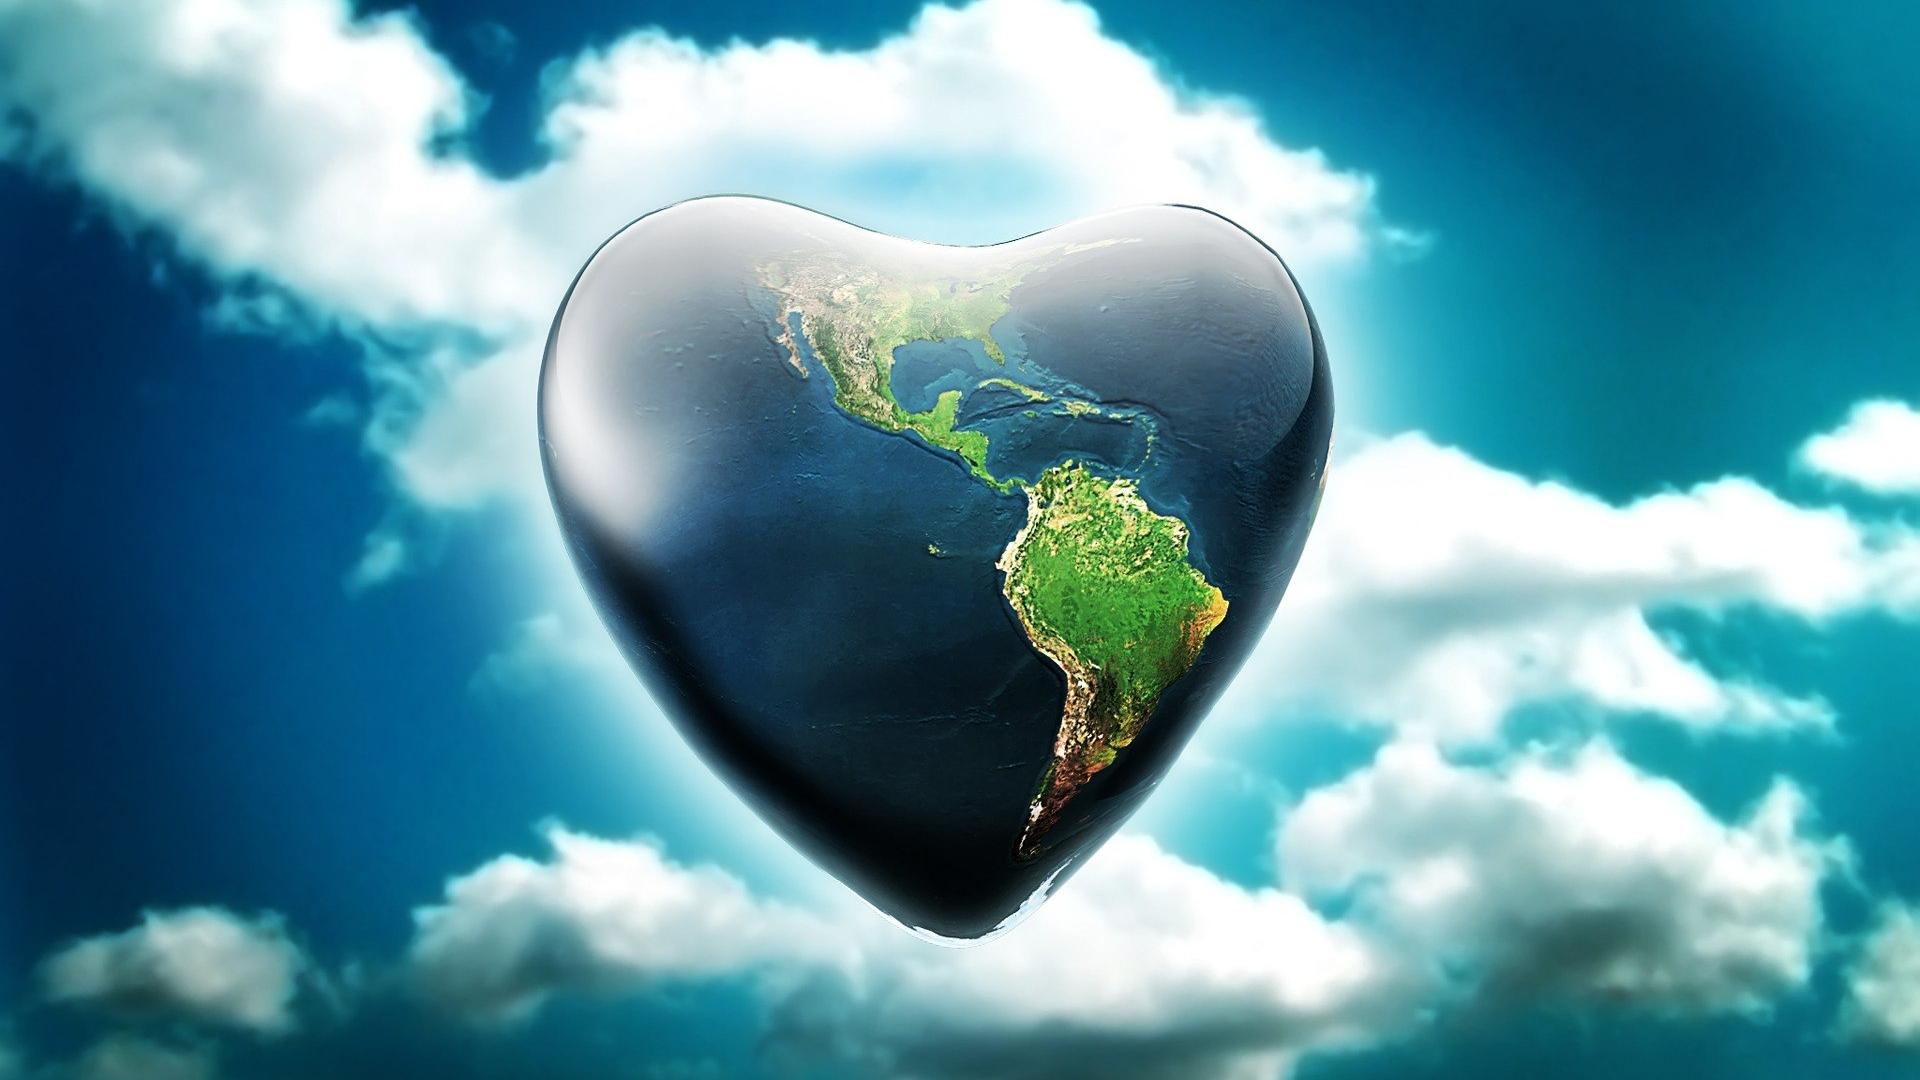 love and peace awesome earth image hd wallpaper - (#5400) - HQ ...